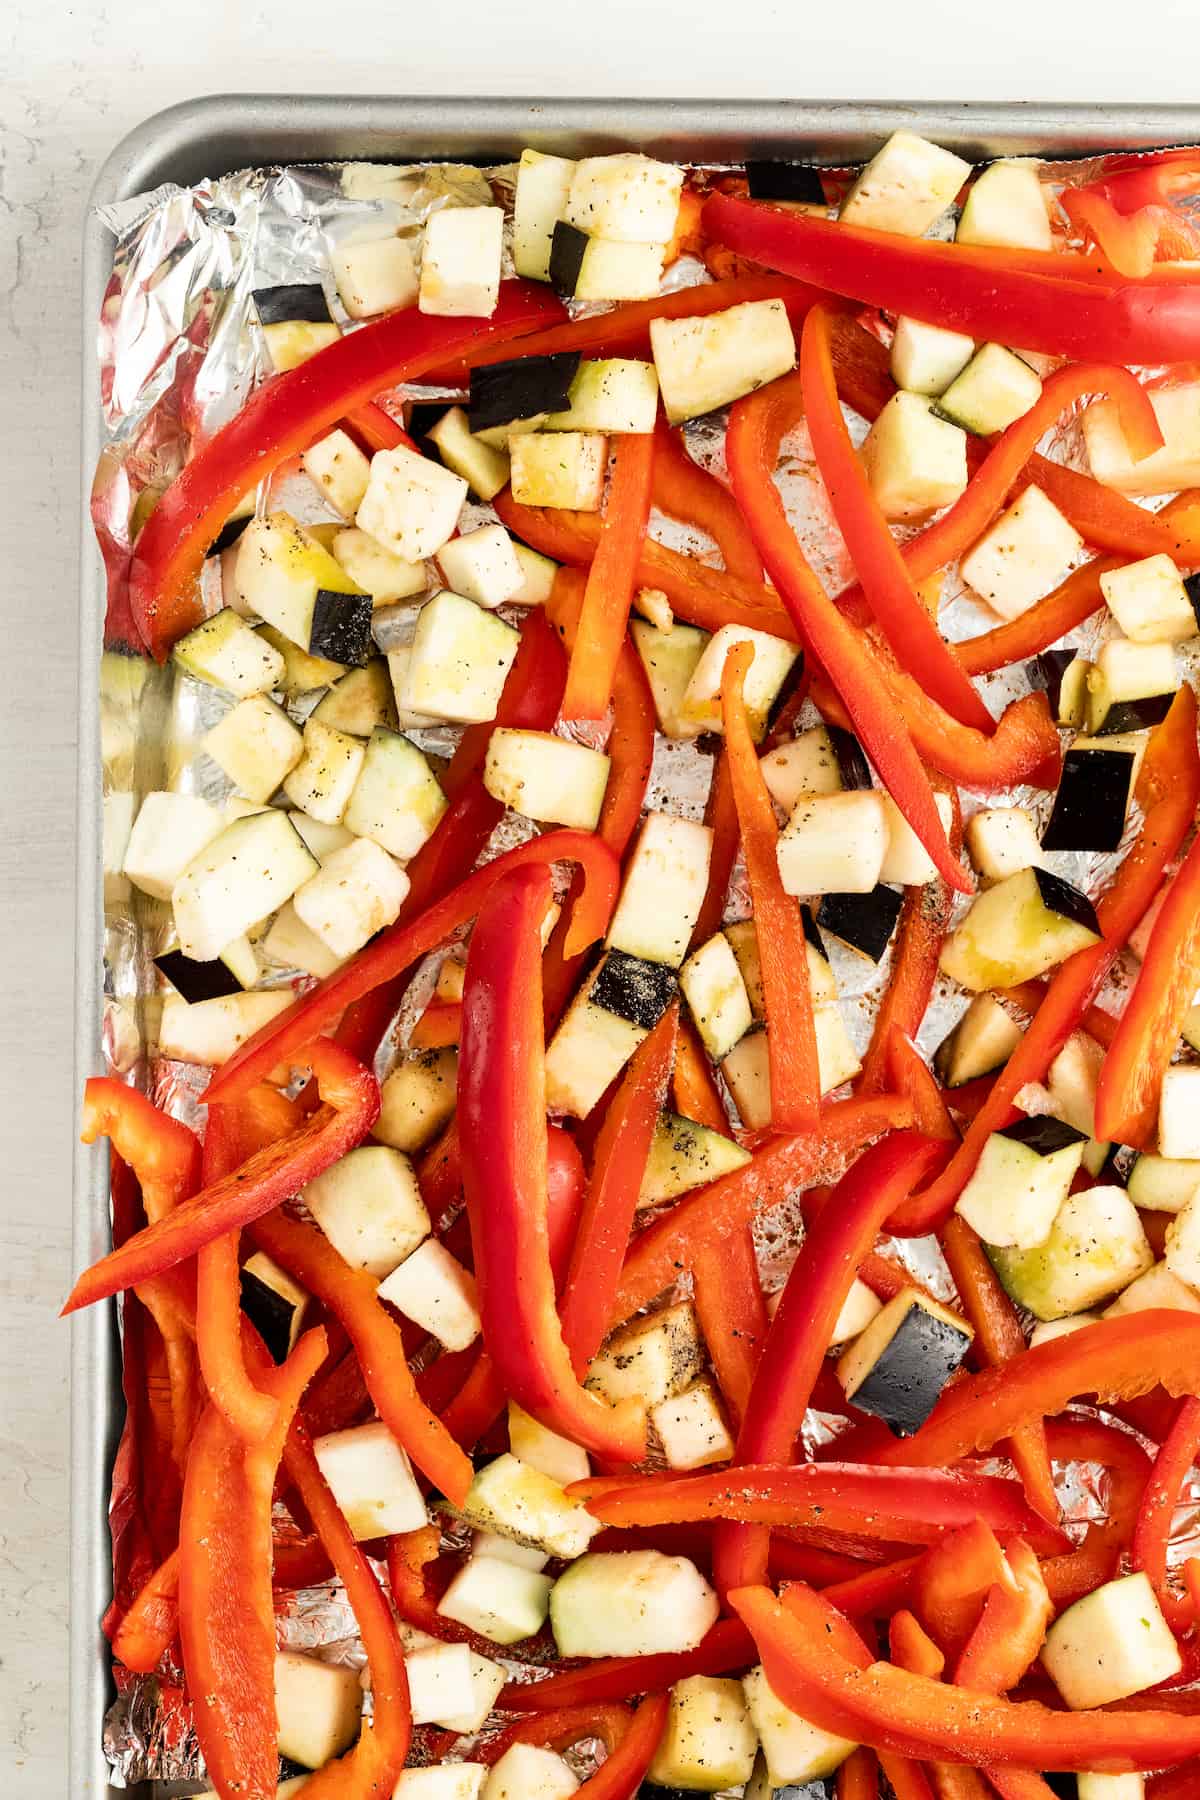 Raw cubed eggplant and sliced red bell pepper on a baking sheet lined with aluminum foil.